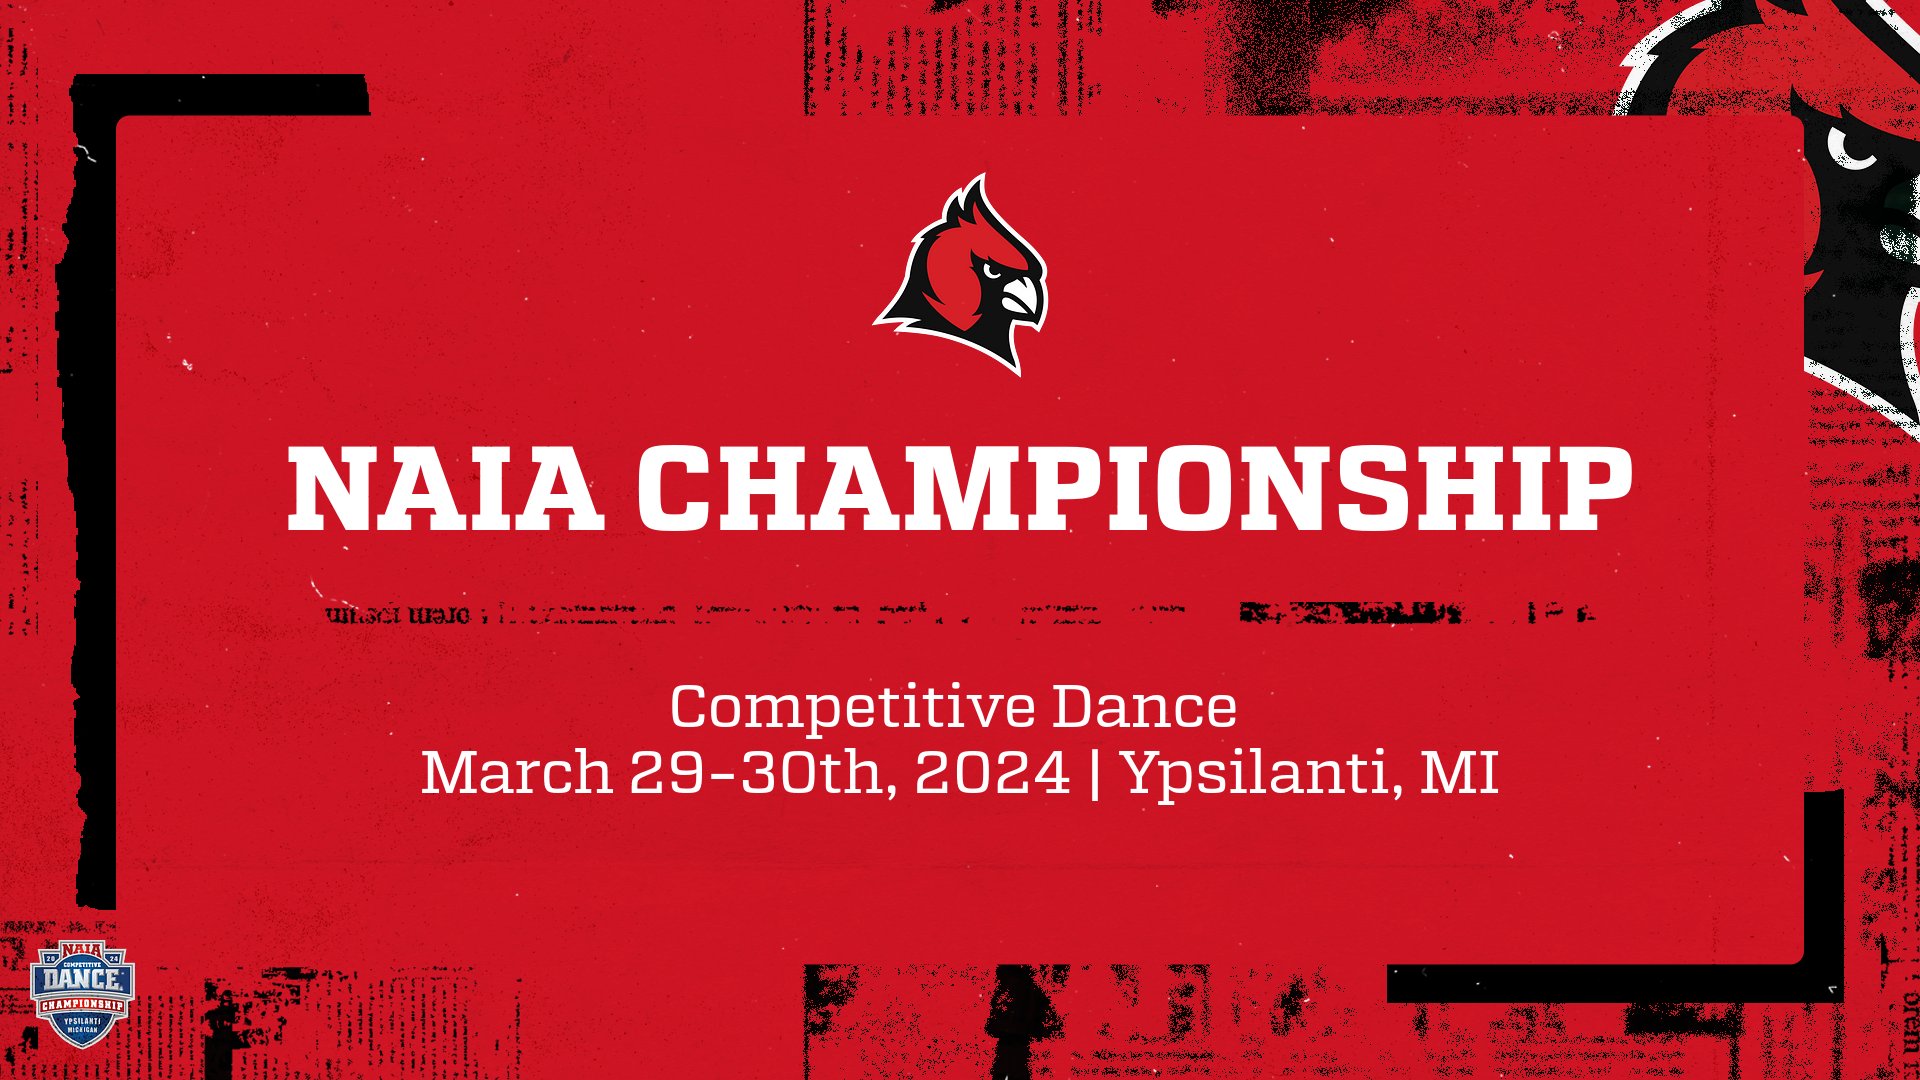 NAIA CHAMPIONSHIP PREVIEW: Dance Prepared for their second National Championship Appearance